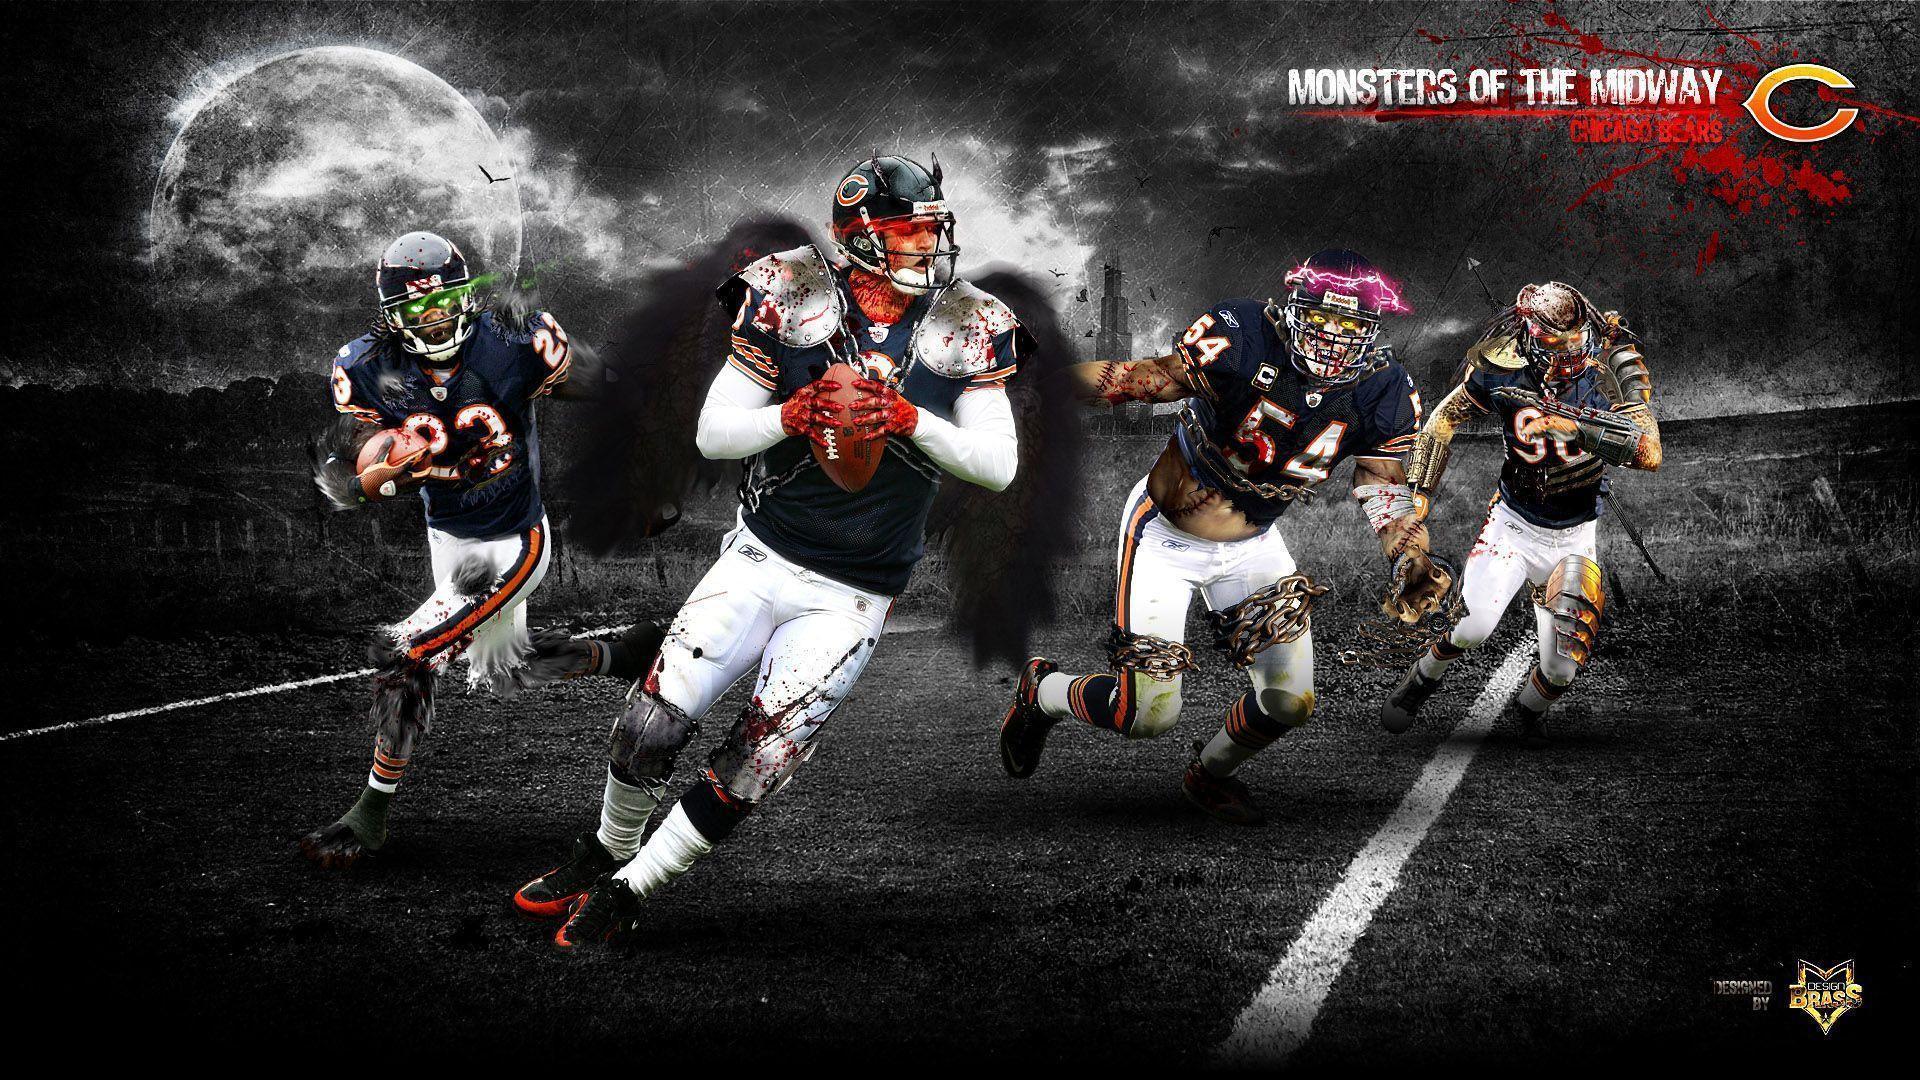 NFL Football Player Chicago Bears wallpaper HD 2016 in Football